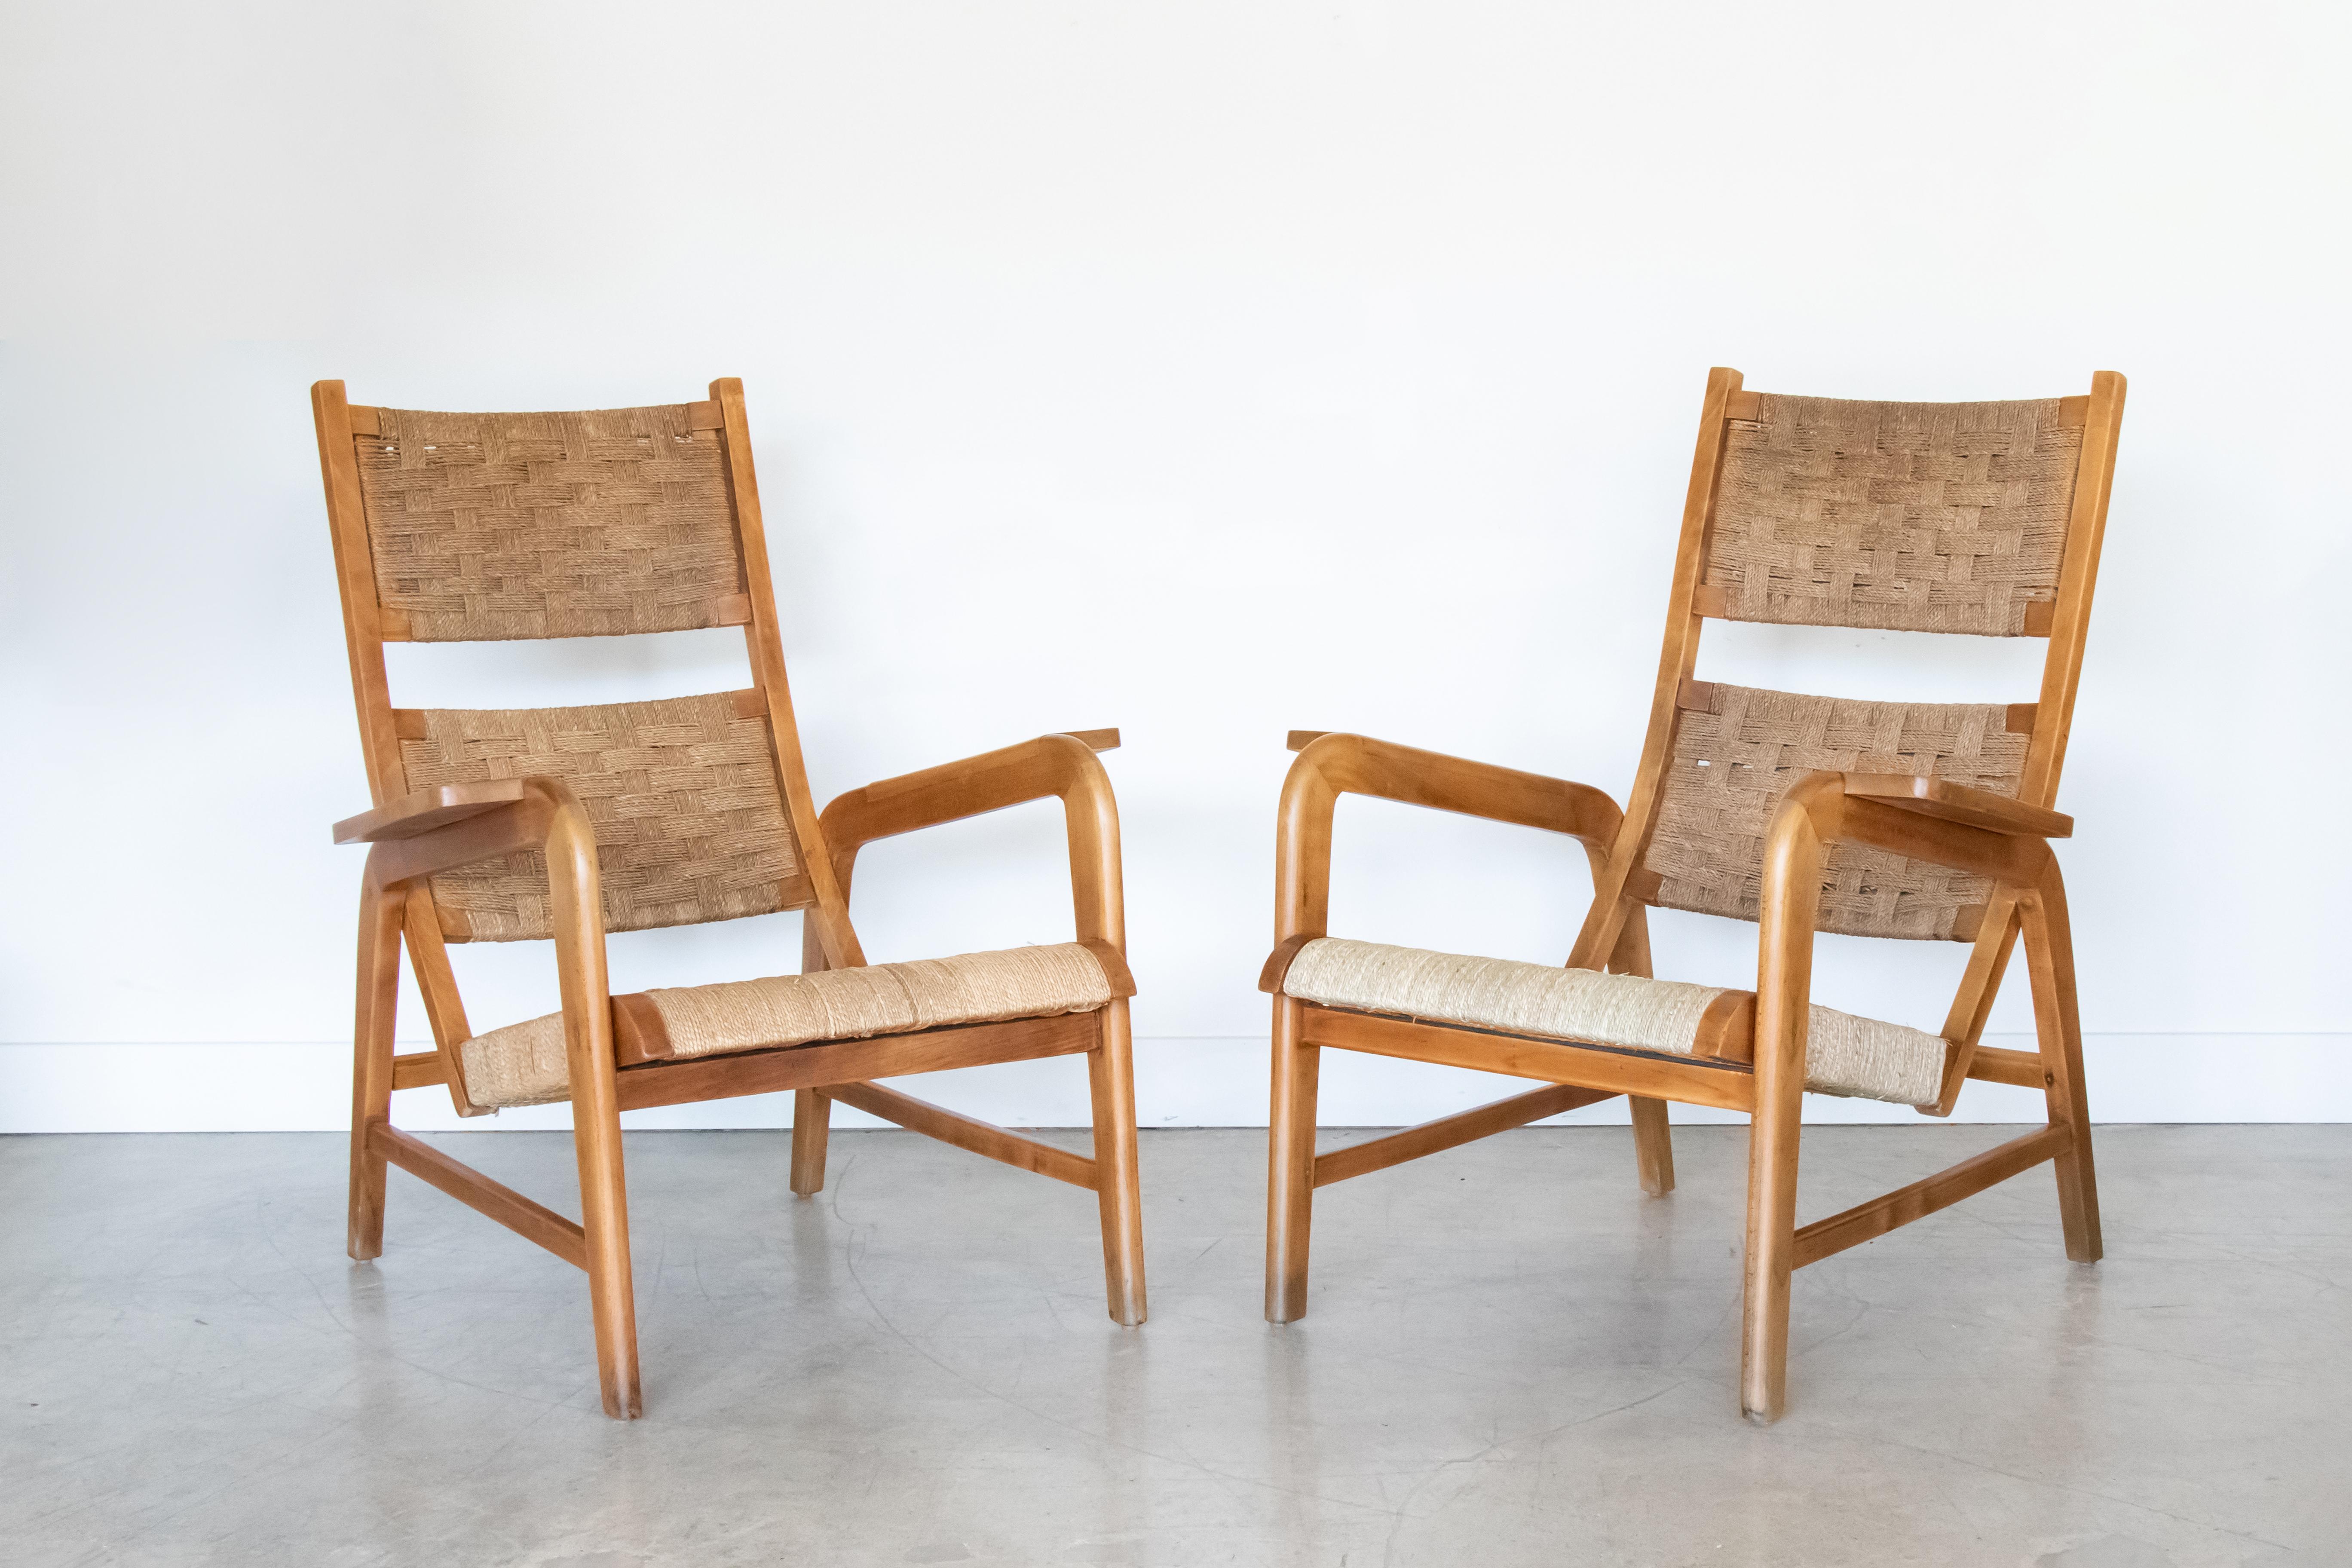 Pair of Italian wood lounge chairs with woven seagrass backs and seats. Beautiful angled legs and arms with high lounge backs. Elm wood frame has been freshly oiled and portions of the woven seagrass have been replaced.